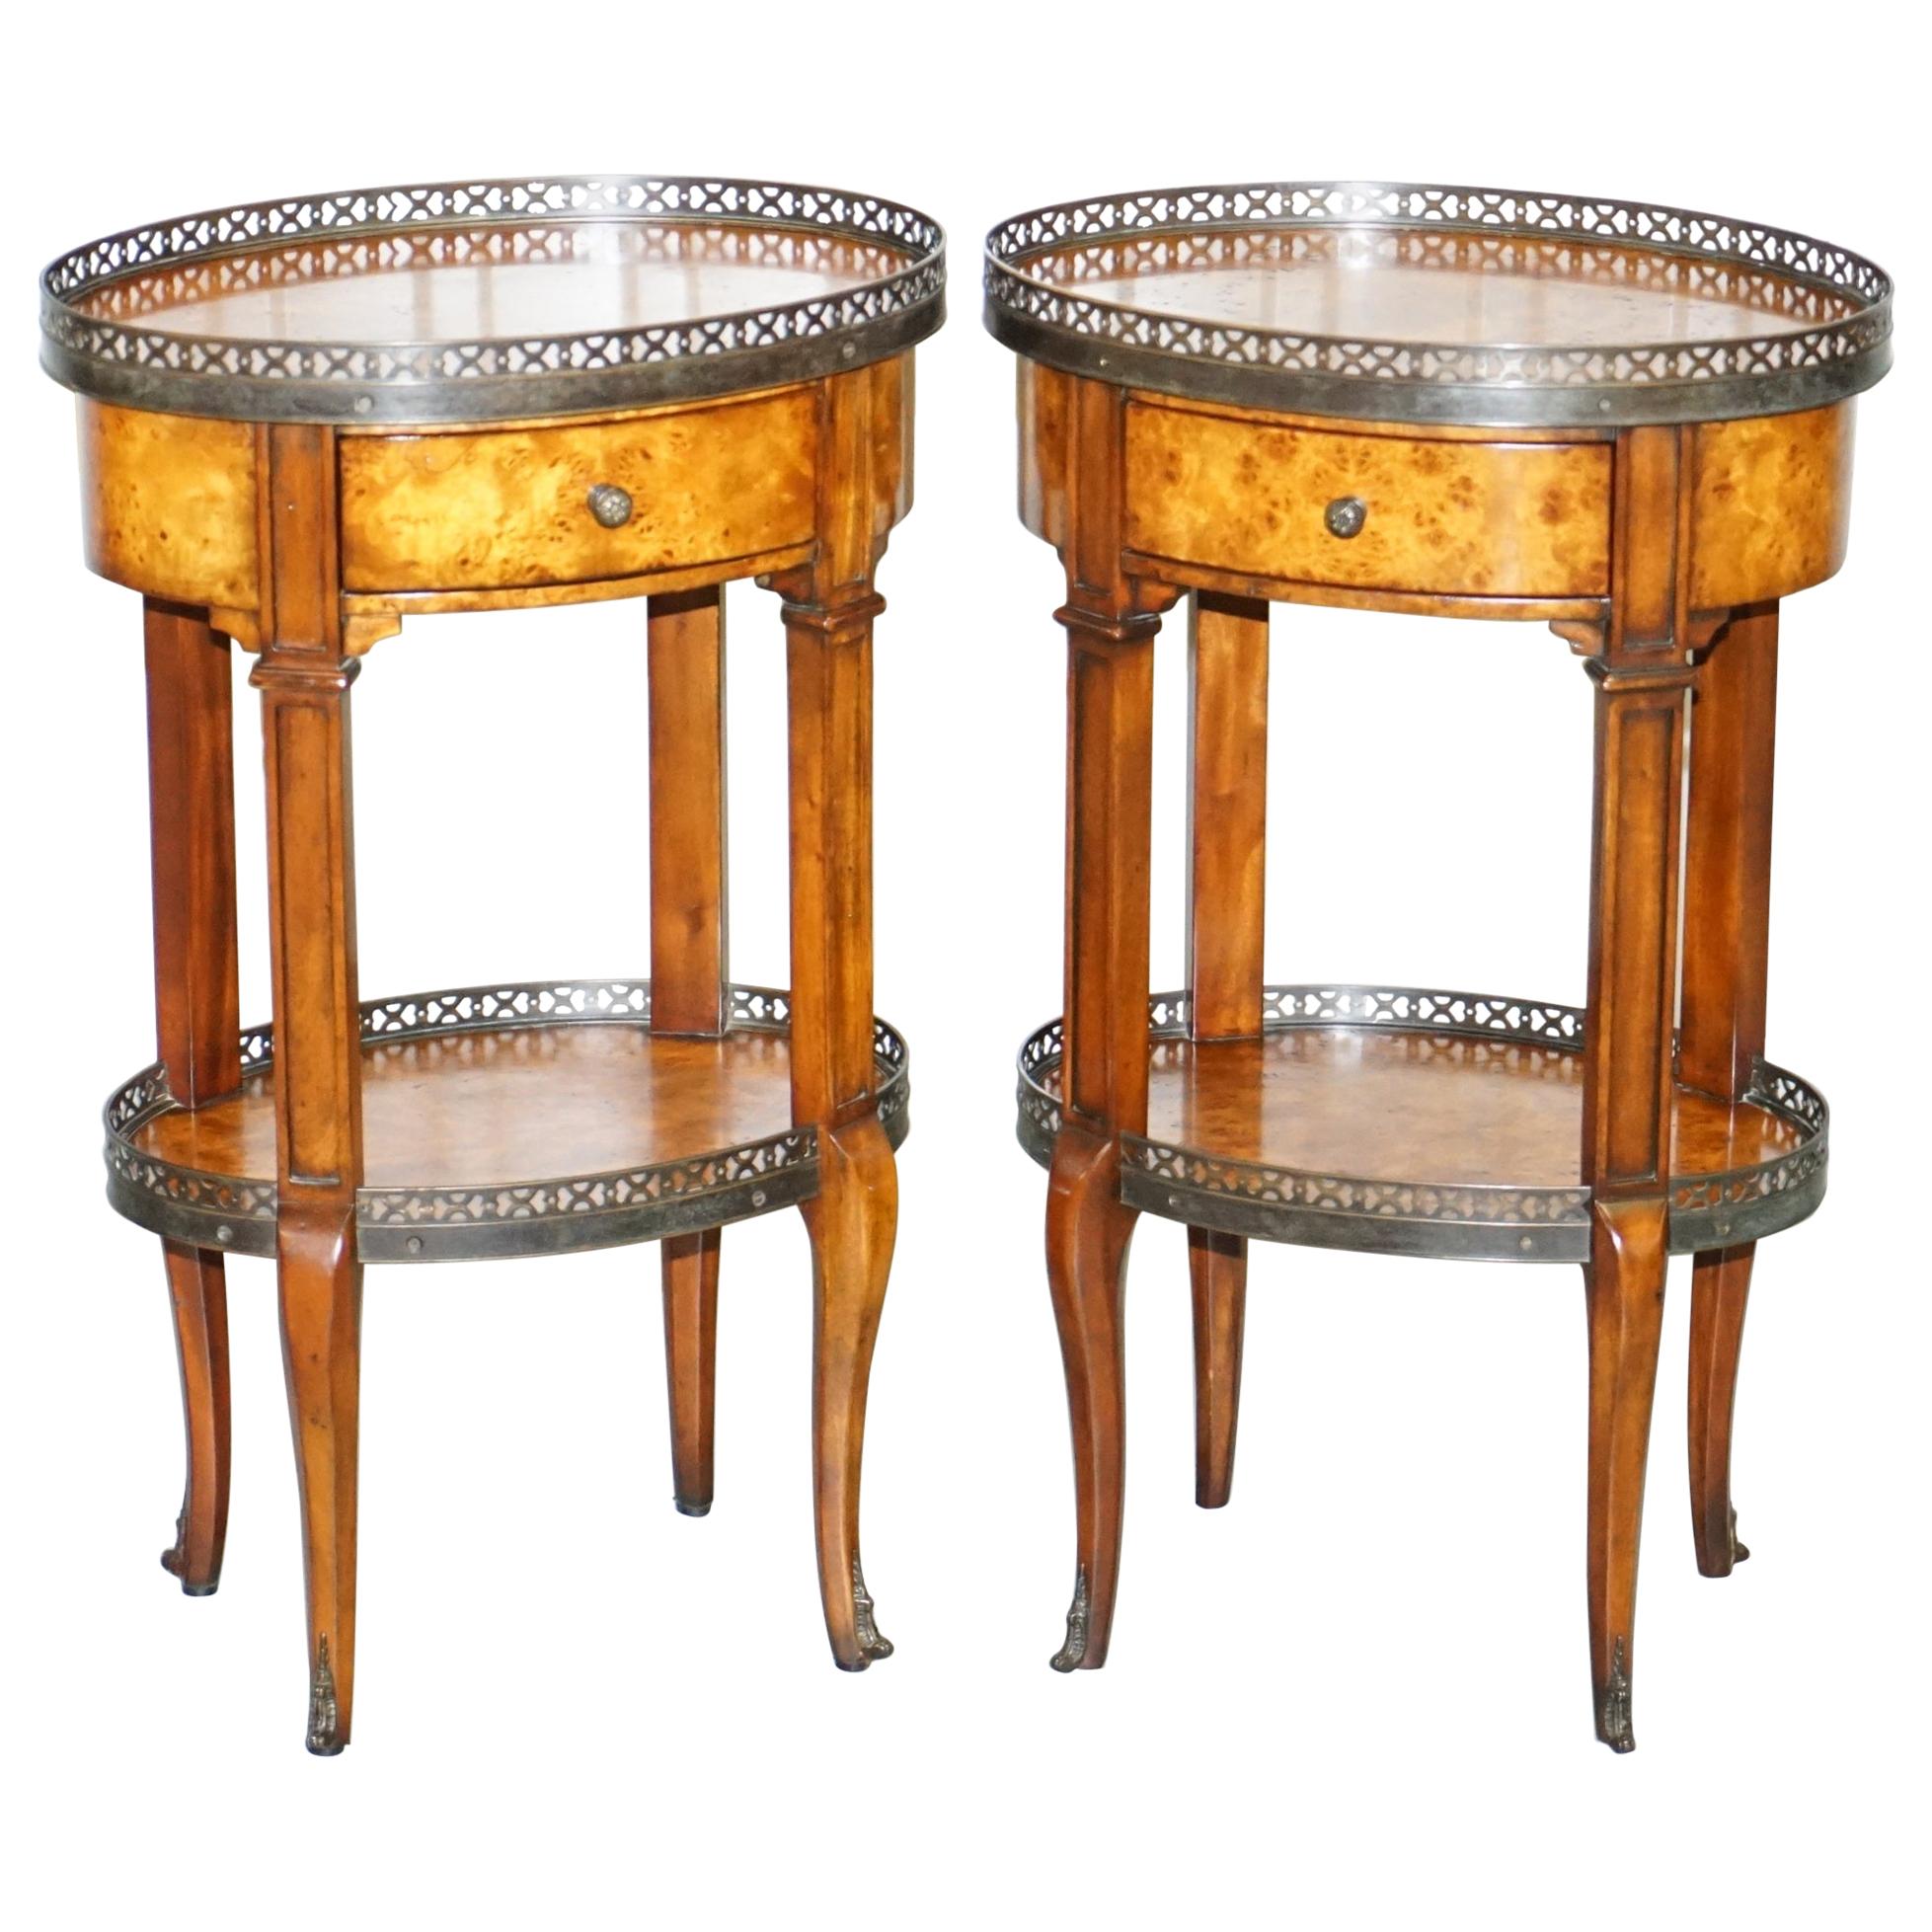 Pair of Burr Walnut Brass Gallery Rail Theodore Alexander Side End Lamp Tables